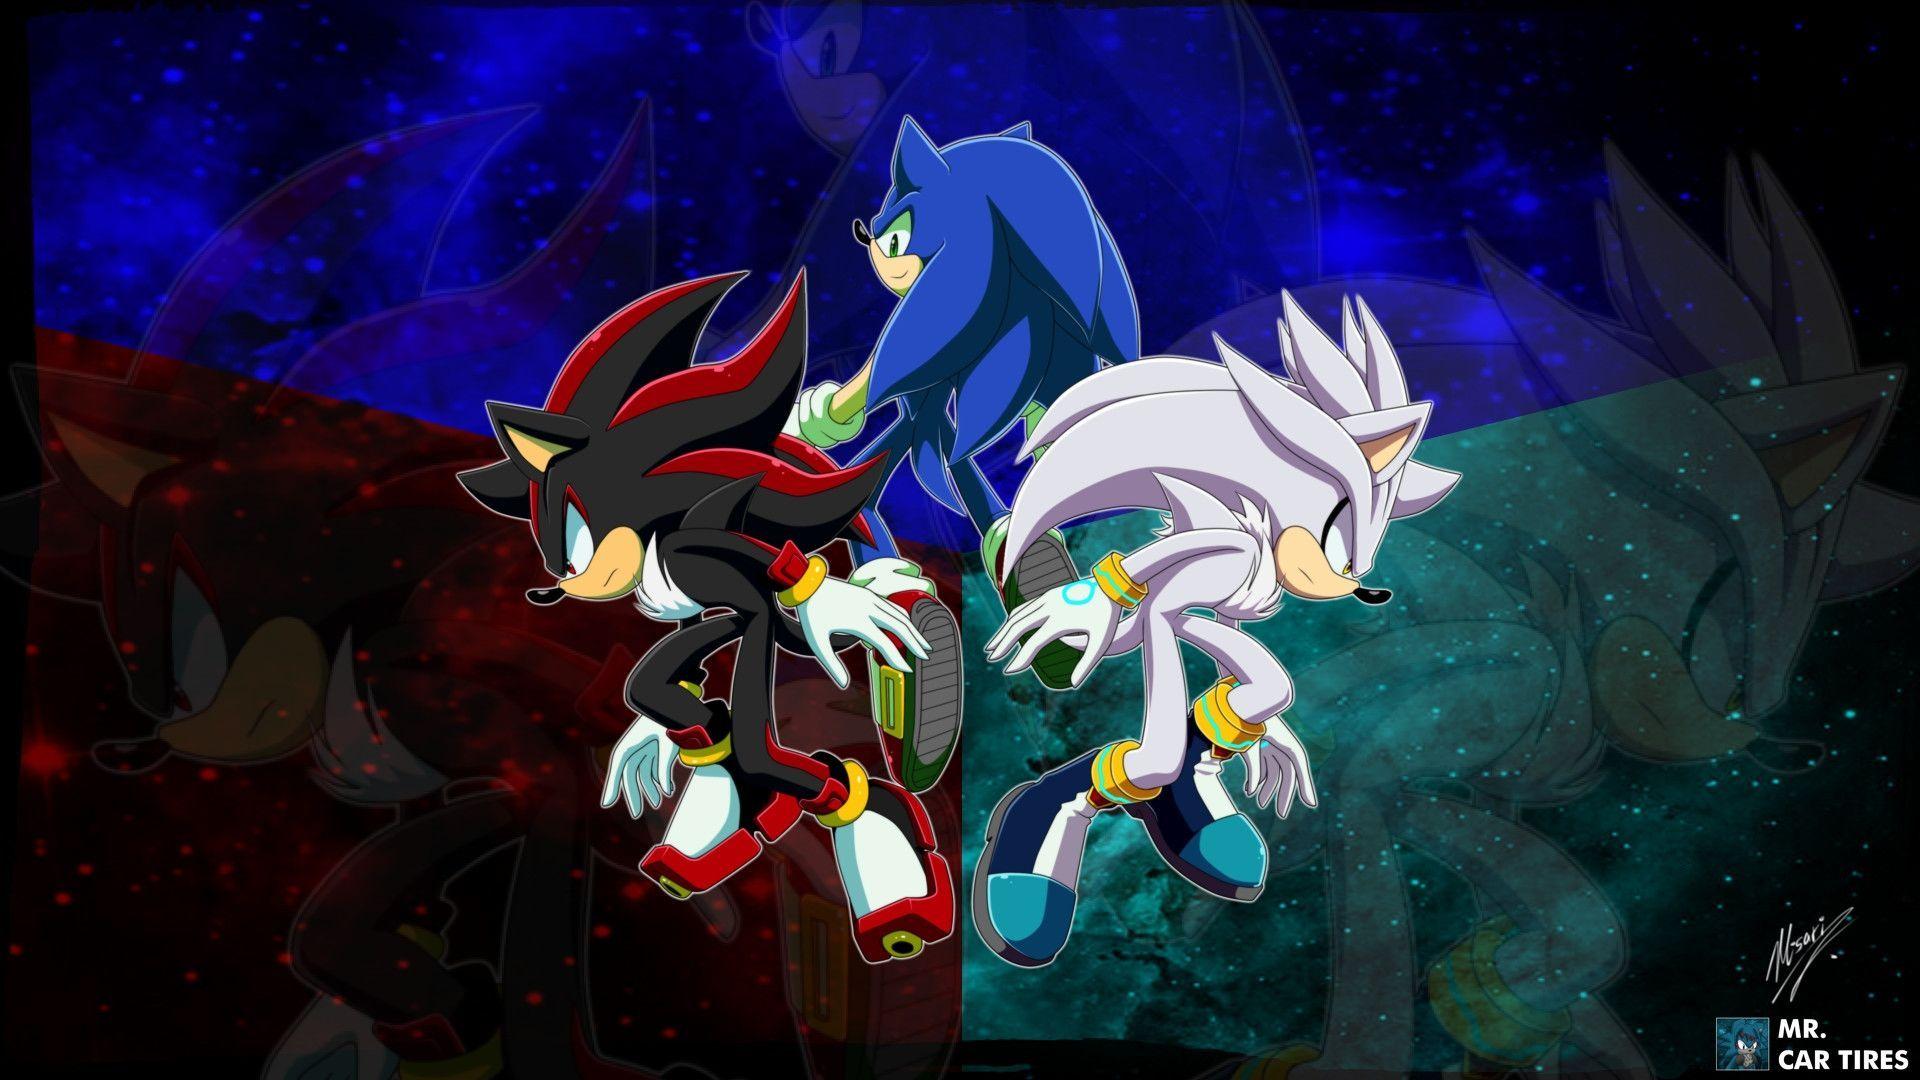 20 Shadow the Hedgehog HD Wallpapers and Backgrounds